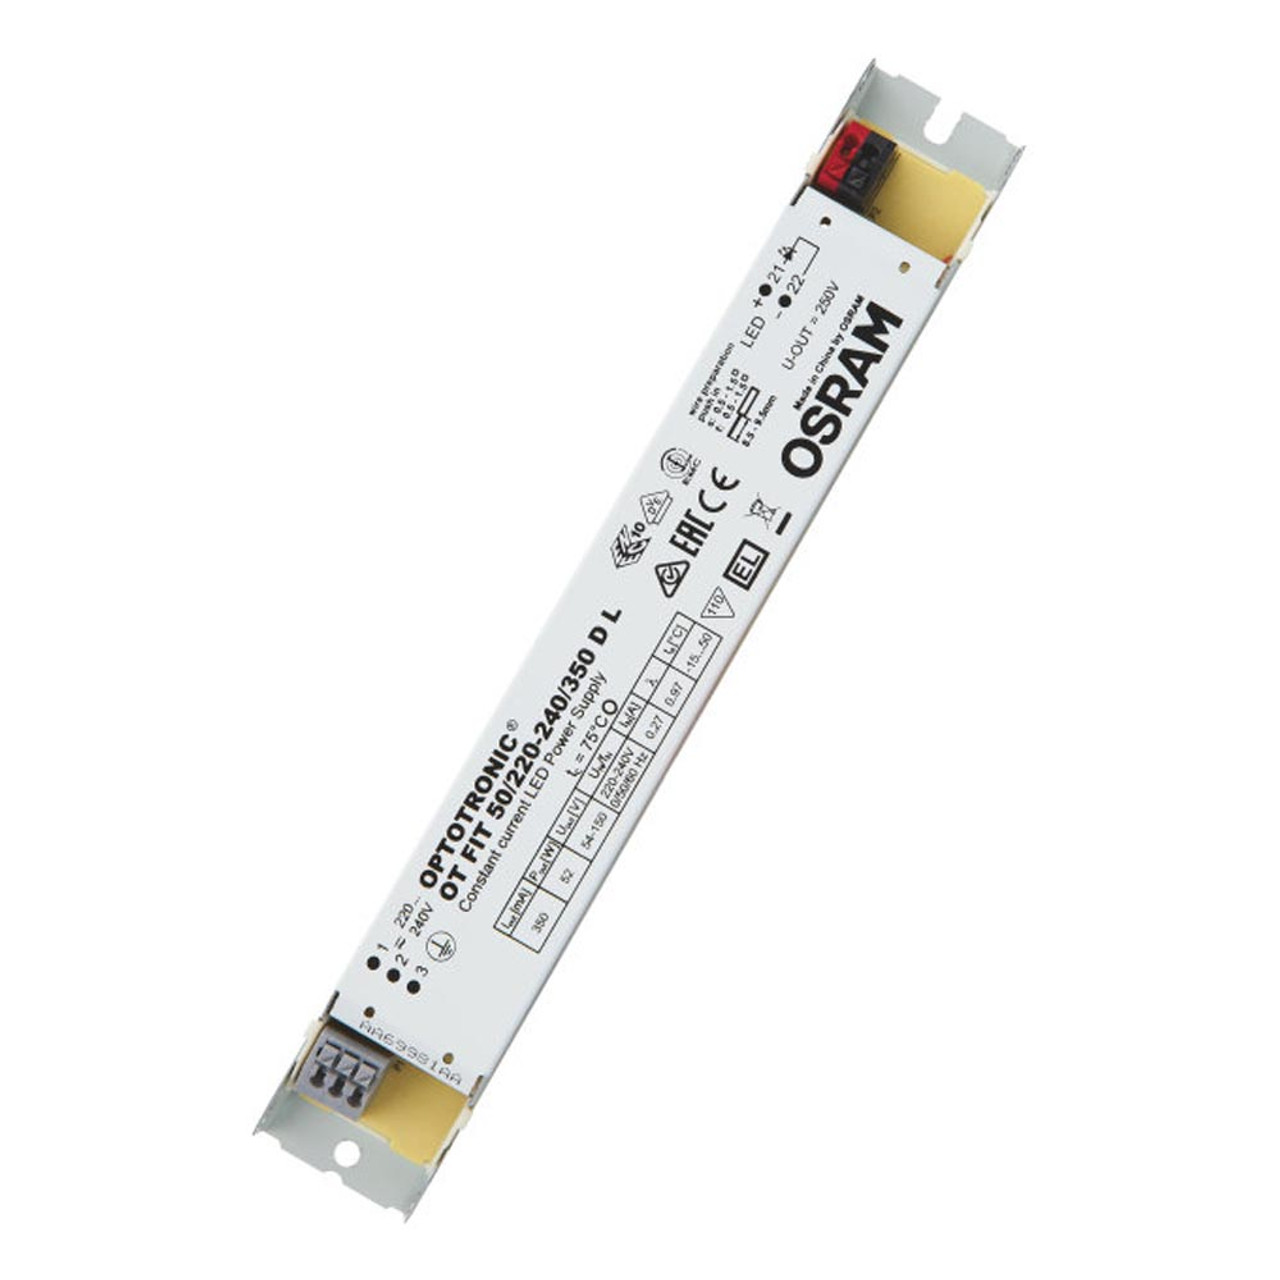 Osram Optotronic 50W 350mA Constant Current LED Driver